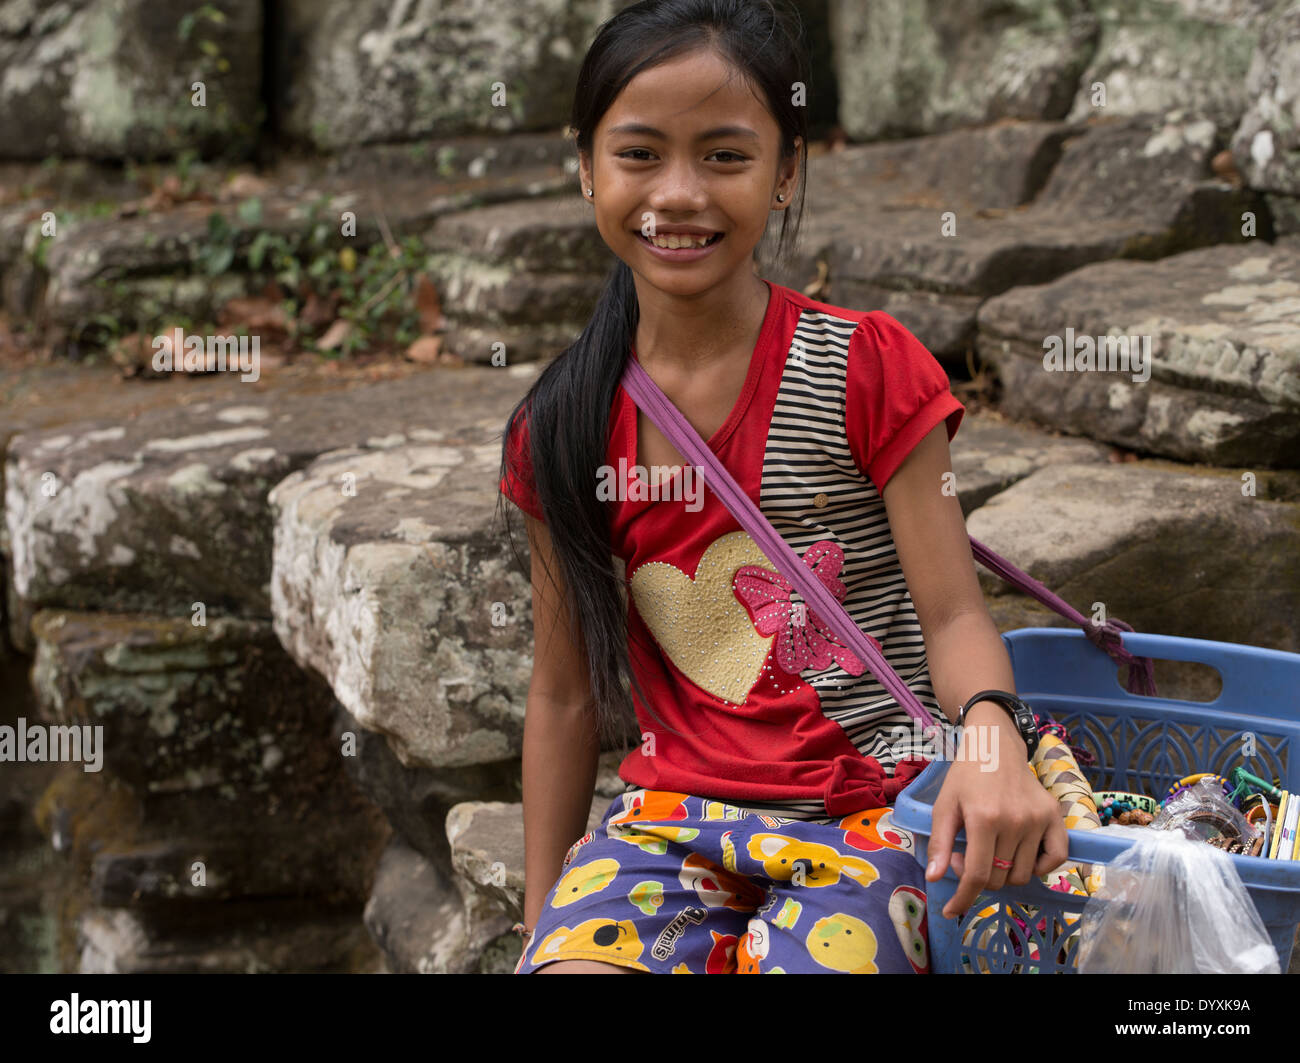 Young girl selling souvenirs at Banteay Kdei Buddhist Monastery / Temple ruins. Siem Reap, Cambodia Stock Photo